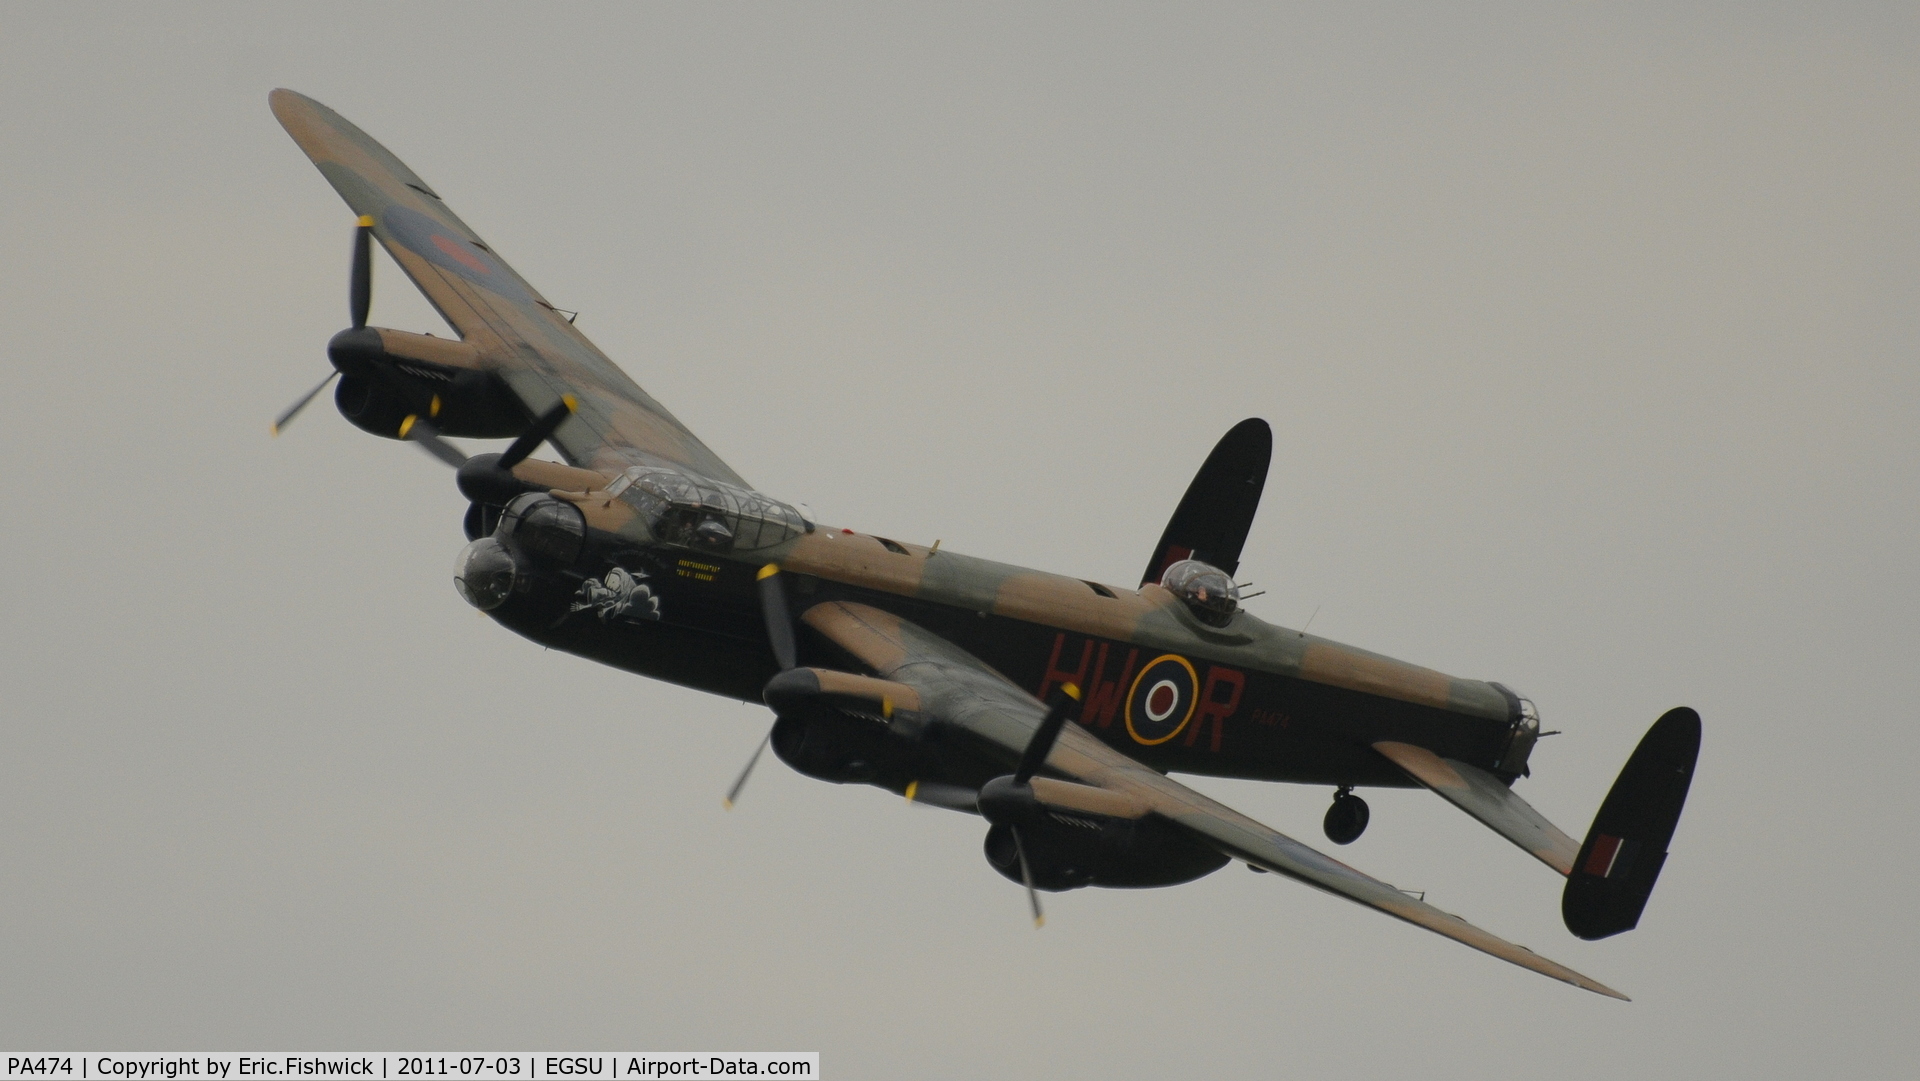 PA474, 1945 Avro 683 Lancaster B1 C/N VACH0052/D2973, PA474 at another excellent Flying Legends Air Show (July 2011)